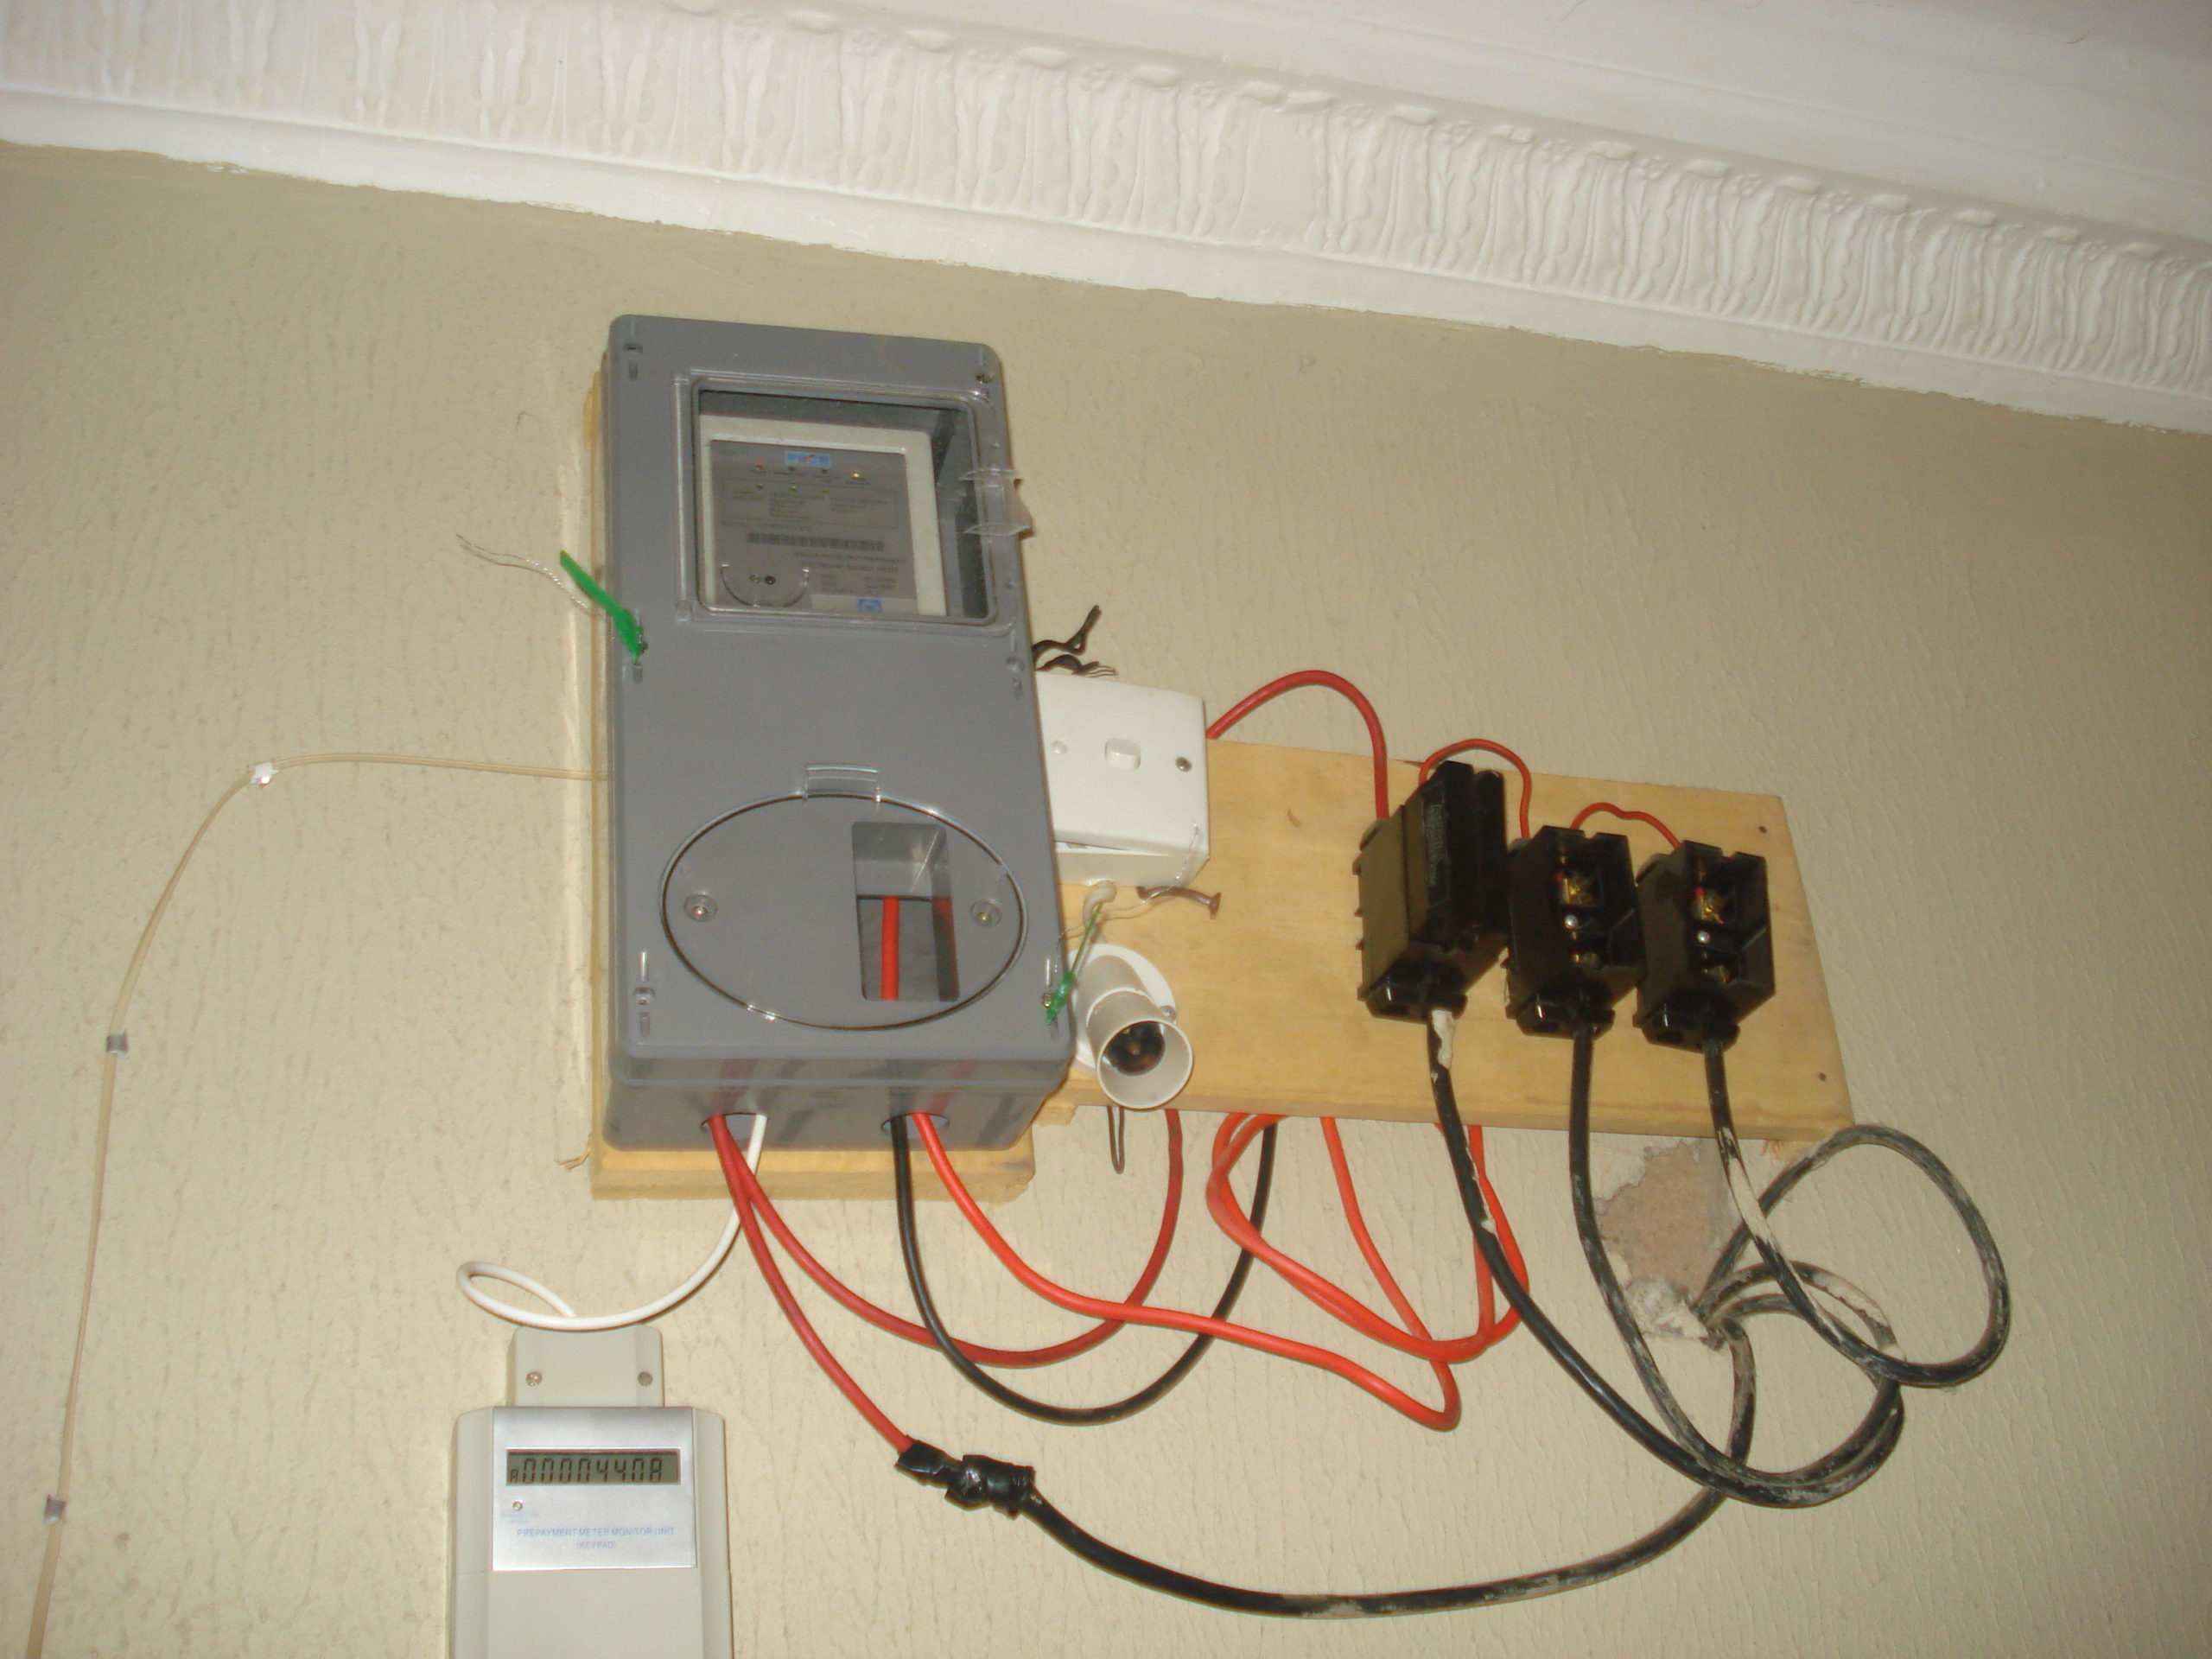 CBN Budgets N60B For First Phase Of Mass Meter As FG Targets 1M Million Installations